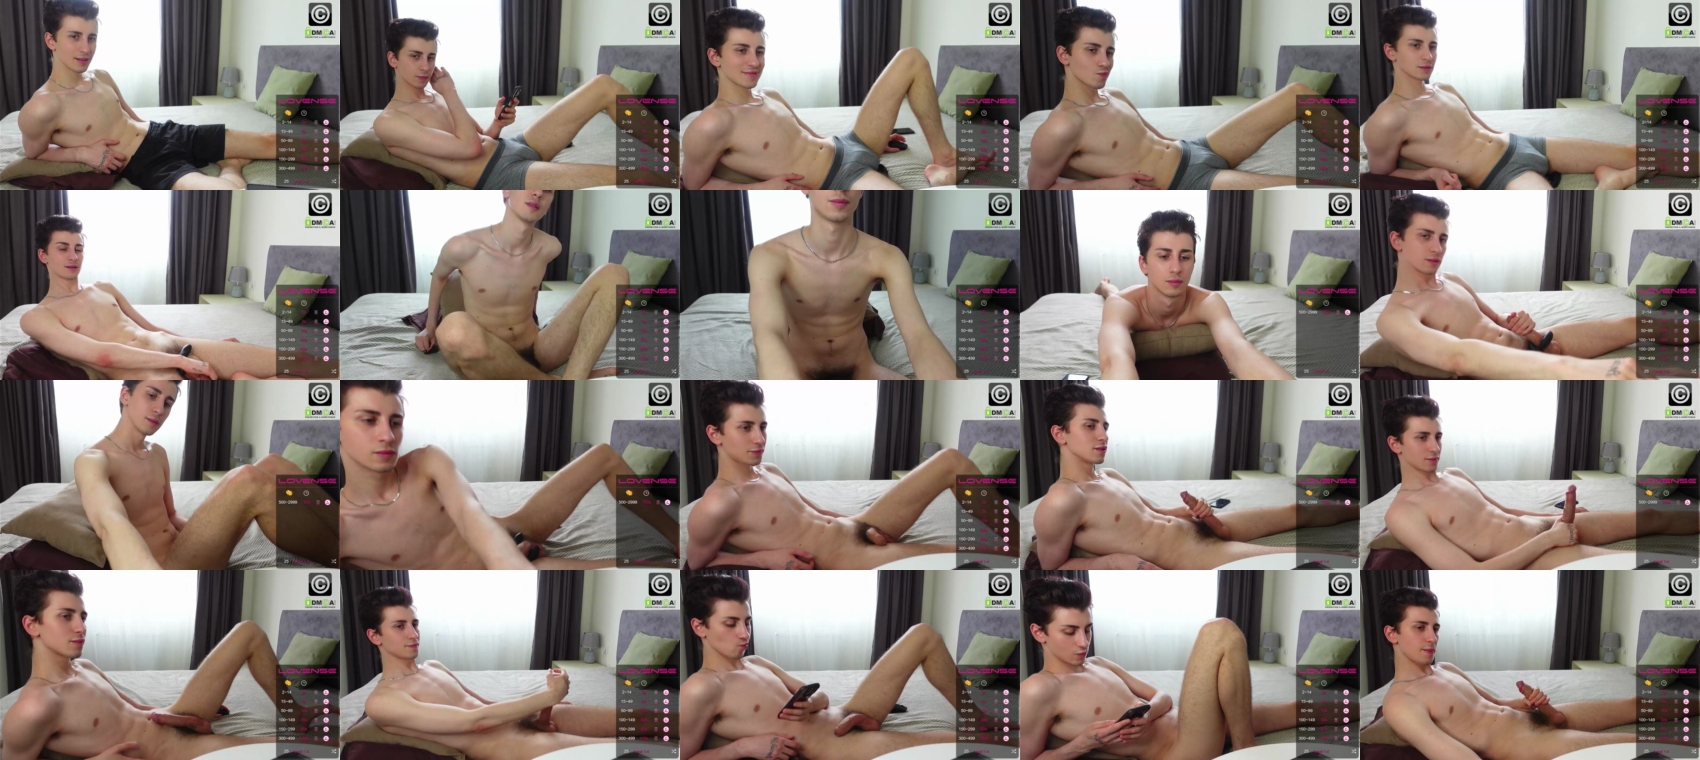 oliver_baker toys CAM SHOW @ Chaturbate 20-06-2022